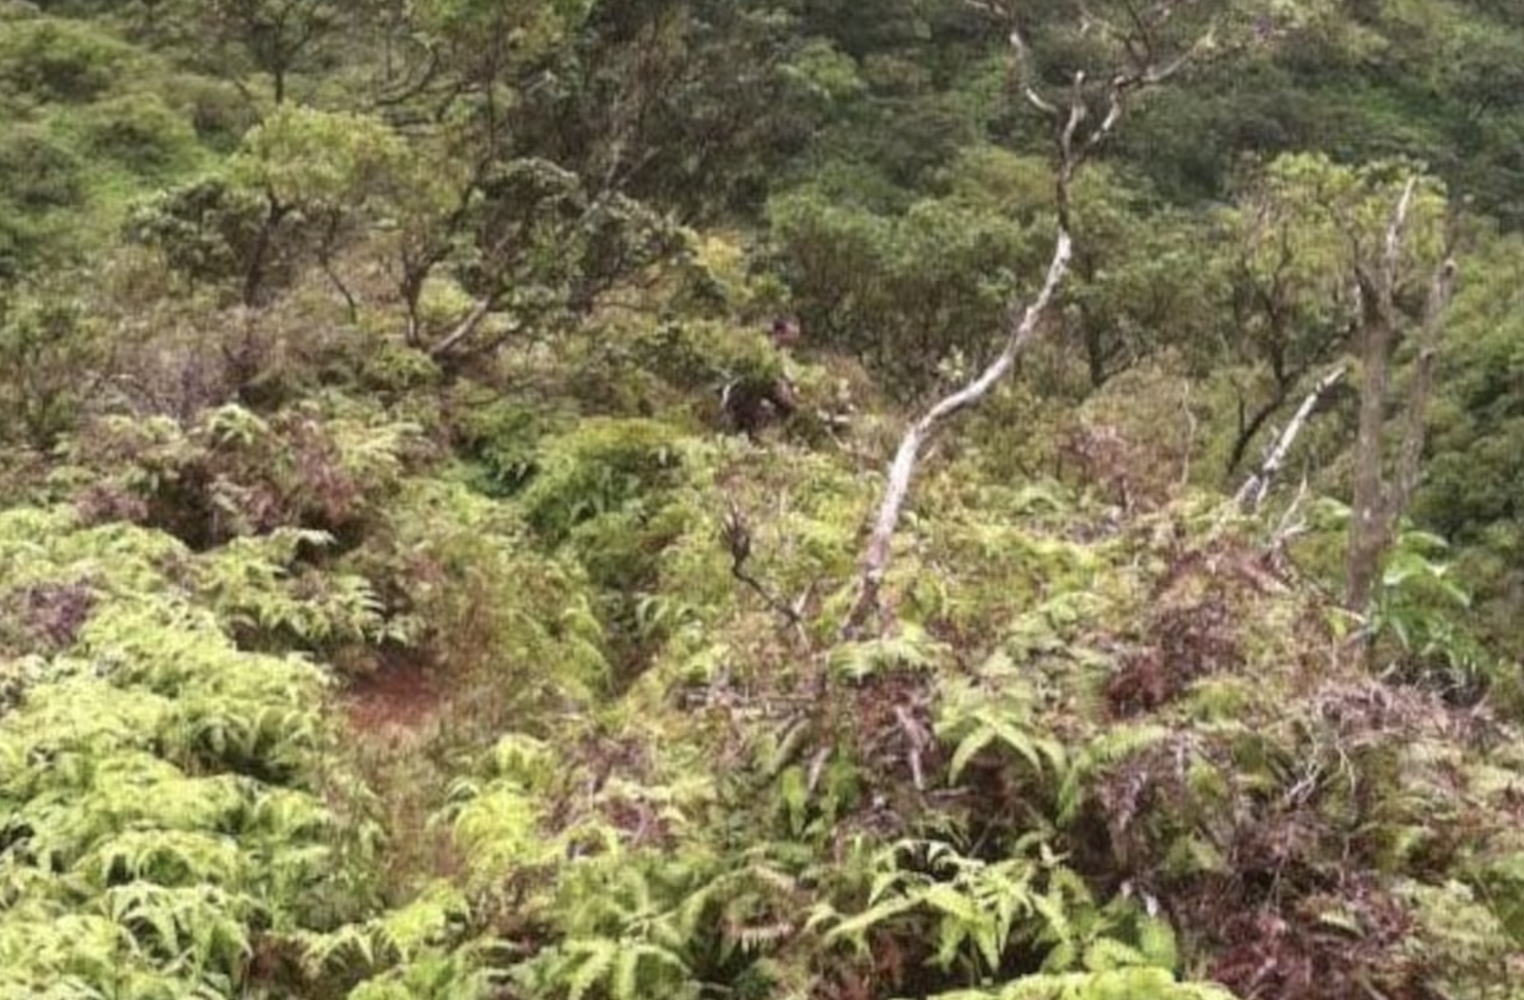 A kid went missing hiking on a spot on the Big Island of Hawaii. He texted some pictures of the scenery while he was hiking. After he never showed up at home, his family noticed somebody lurking in bushes in the photos he sent. (It’s a head in the very middle.)